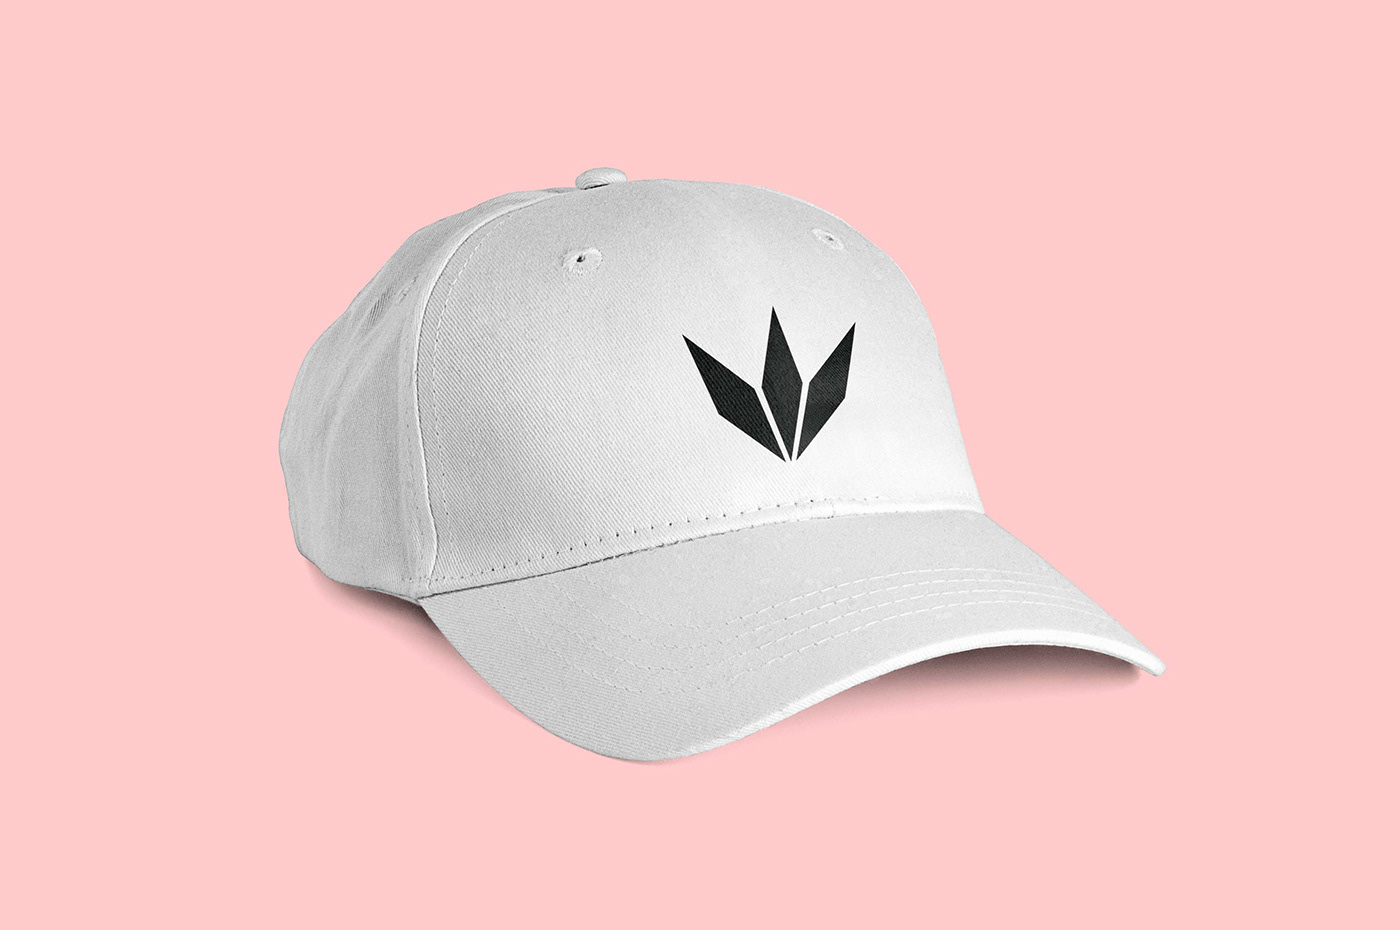 Image contains: Casroy logo elegantly placed on a cap by Humza DZN.
